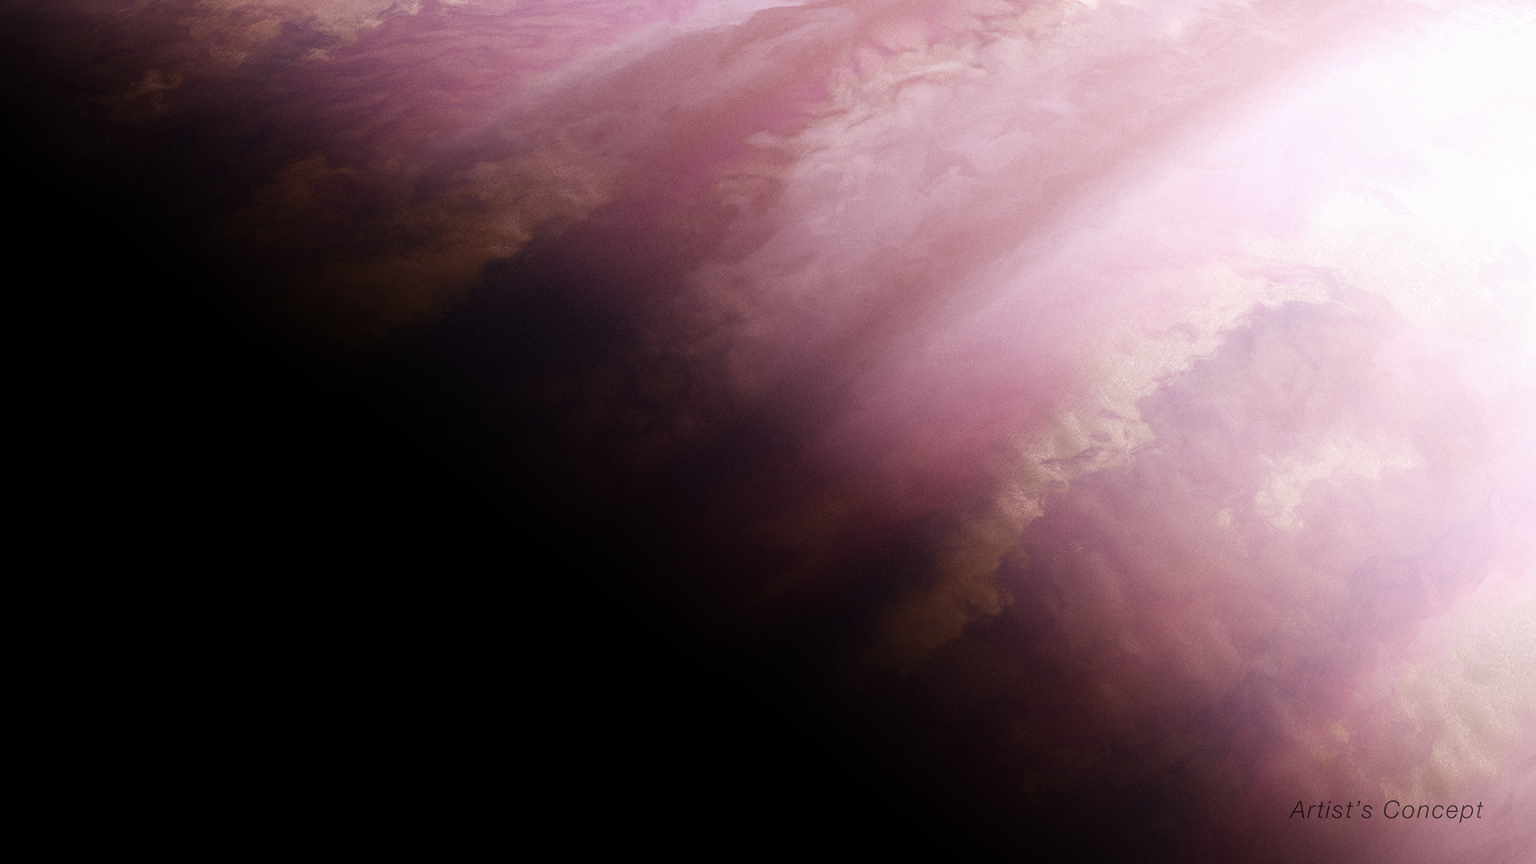 Illustration of a planet, zoomed in on the planet's dayside/nightside boundary. The planet encompasses takes up the full image. At the bottom left, the image is dark, depicting the nightside covering the planet in a dark shadow. In the right side of the image, the planet has a fuzzy orange-pink atmosphere with hints of latitudinal wispy cloud bands. The right upper corner is bright, where the star (not illustrated) shines.